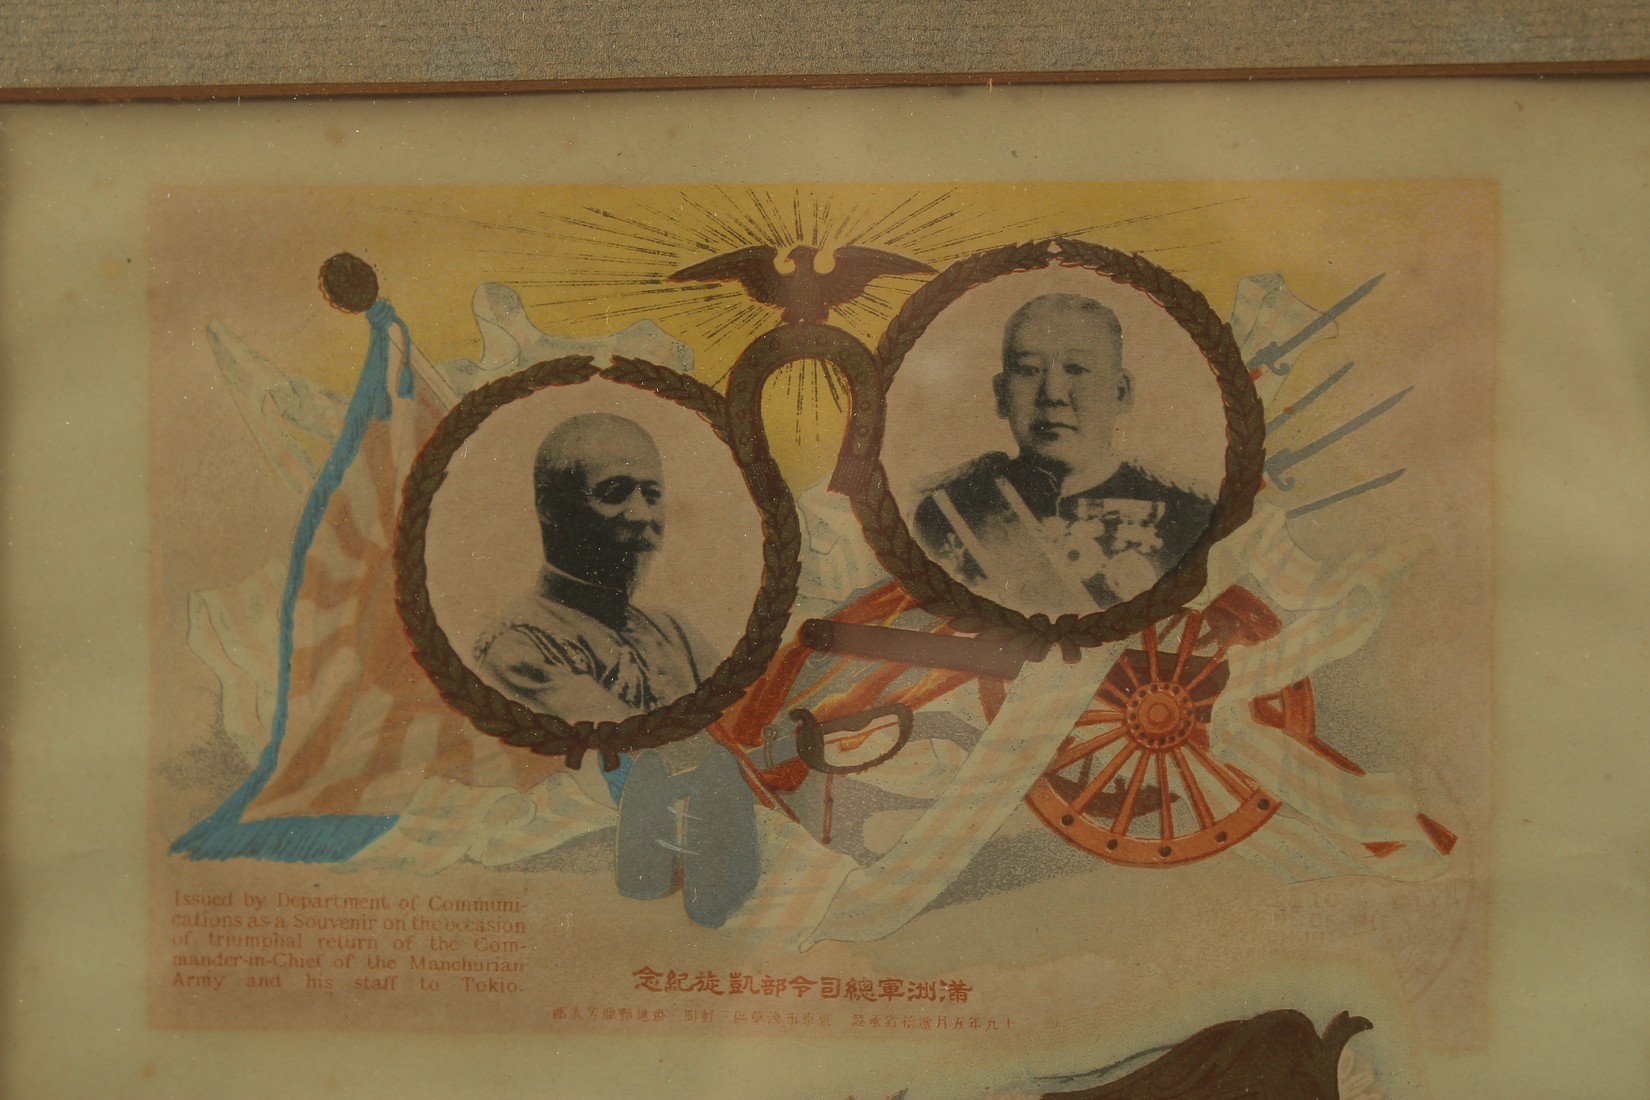 A LARGE JAPANESE COMMEMORATIVE PRINT FOR THE RUSSO-JAPANESE WAR, C.1906, with several interesting - Image 2 of 10